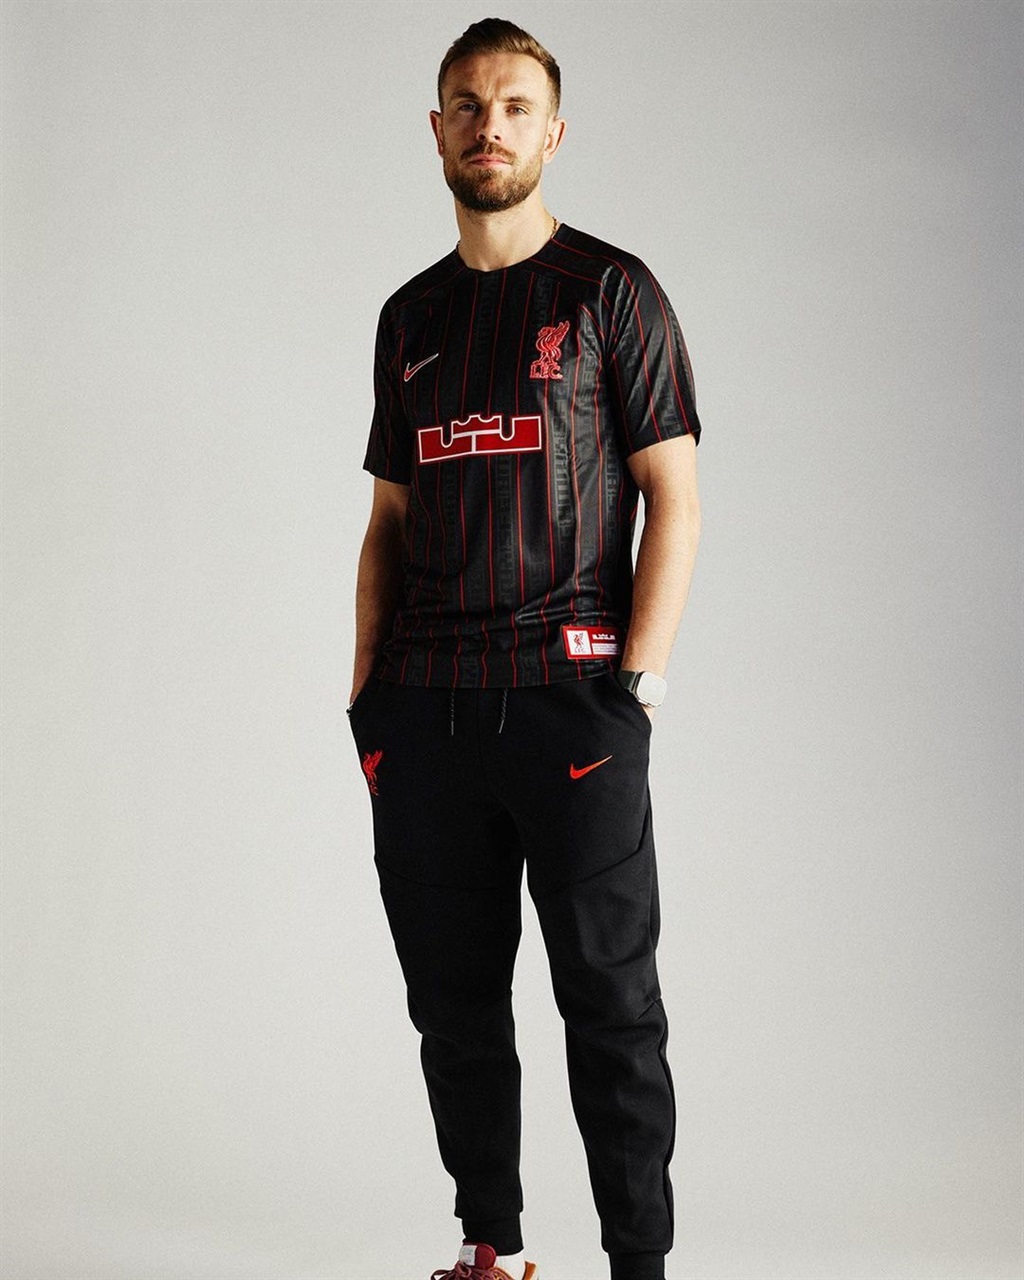 The Liverpool FC x LeBron James collection.The Liv